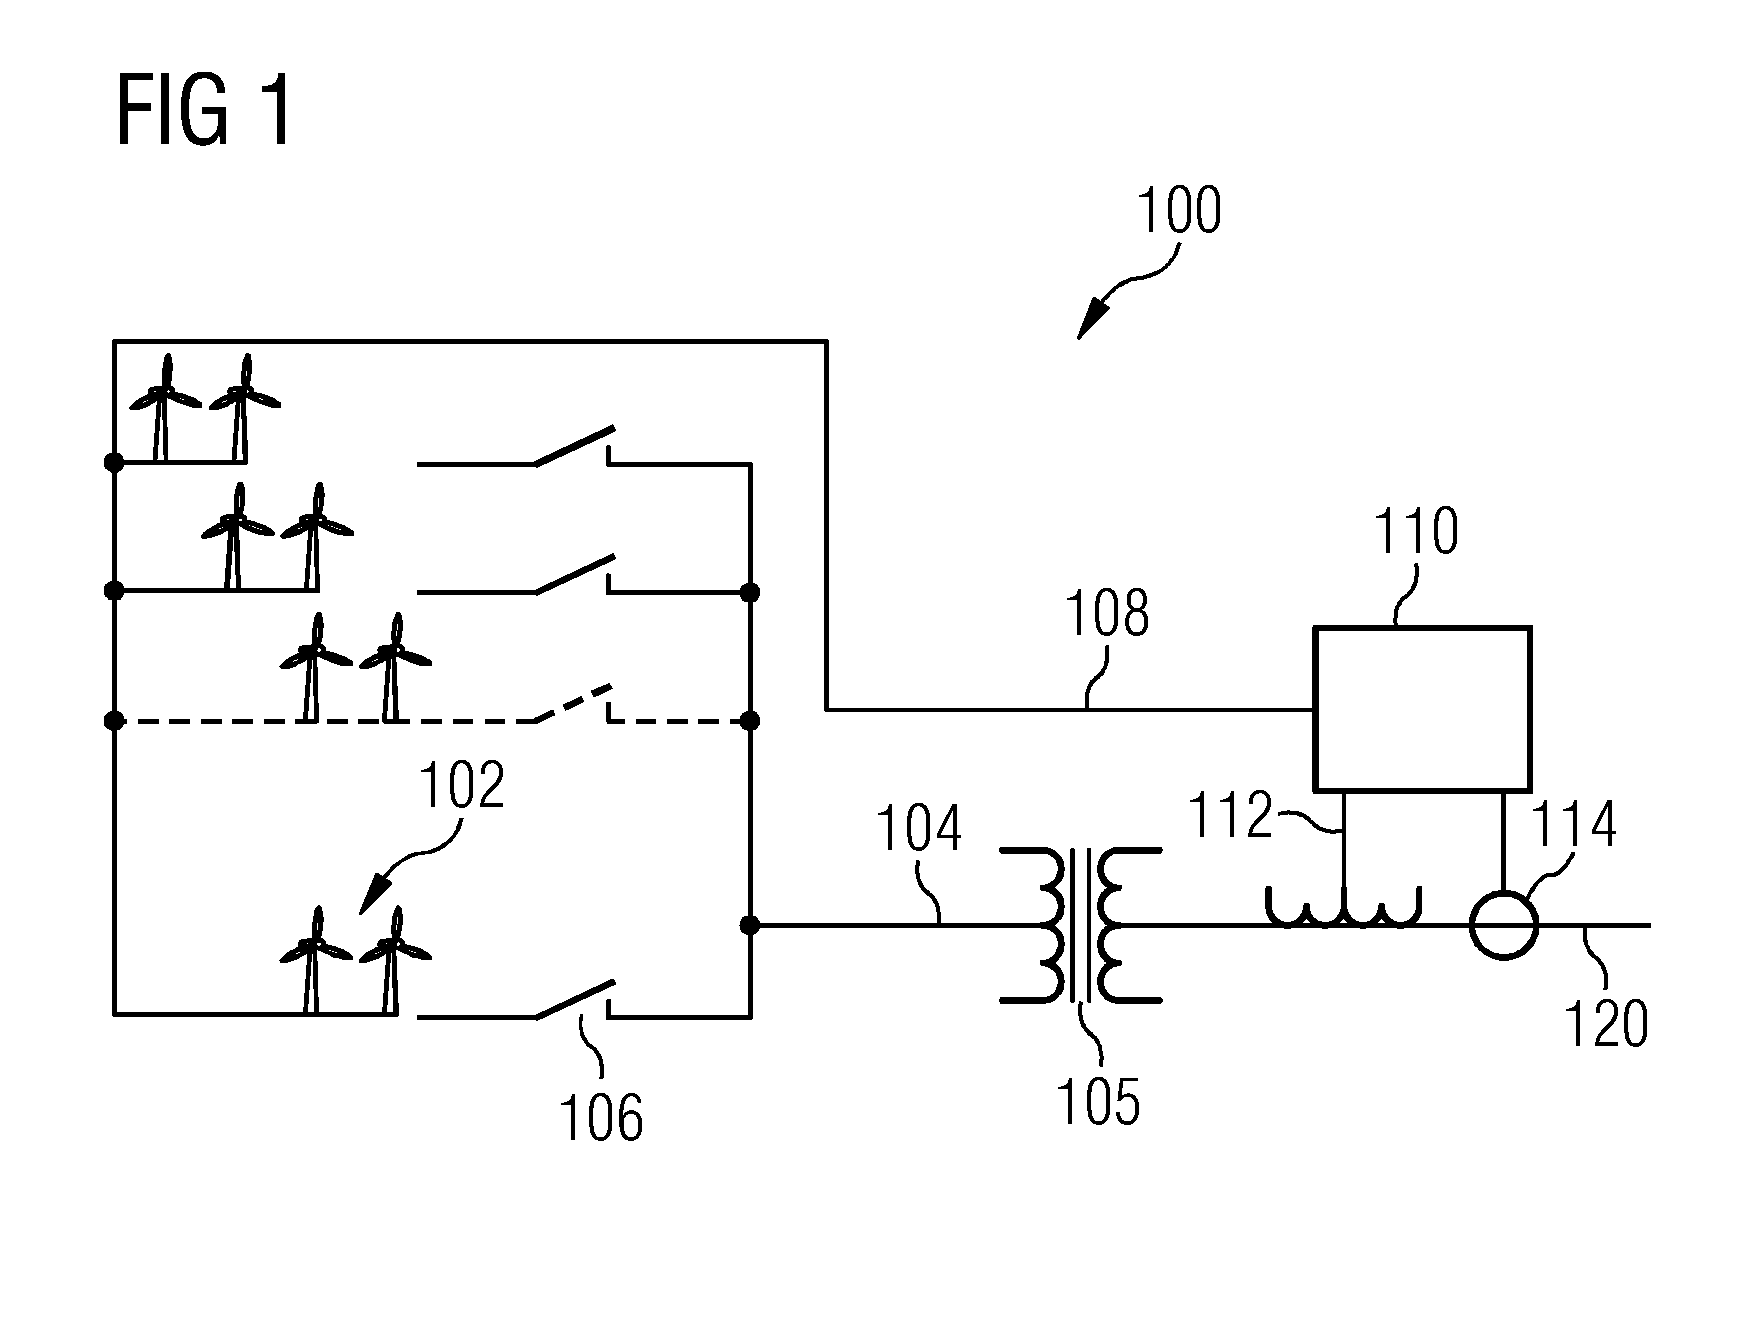 Controlling wind power plant with negative power capability to respond to grid frequency instability